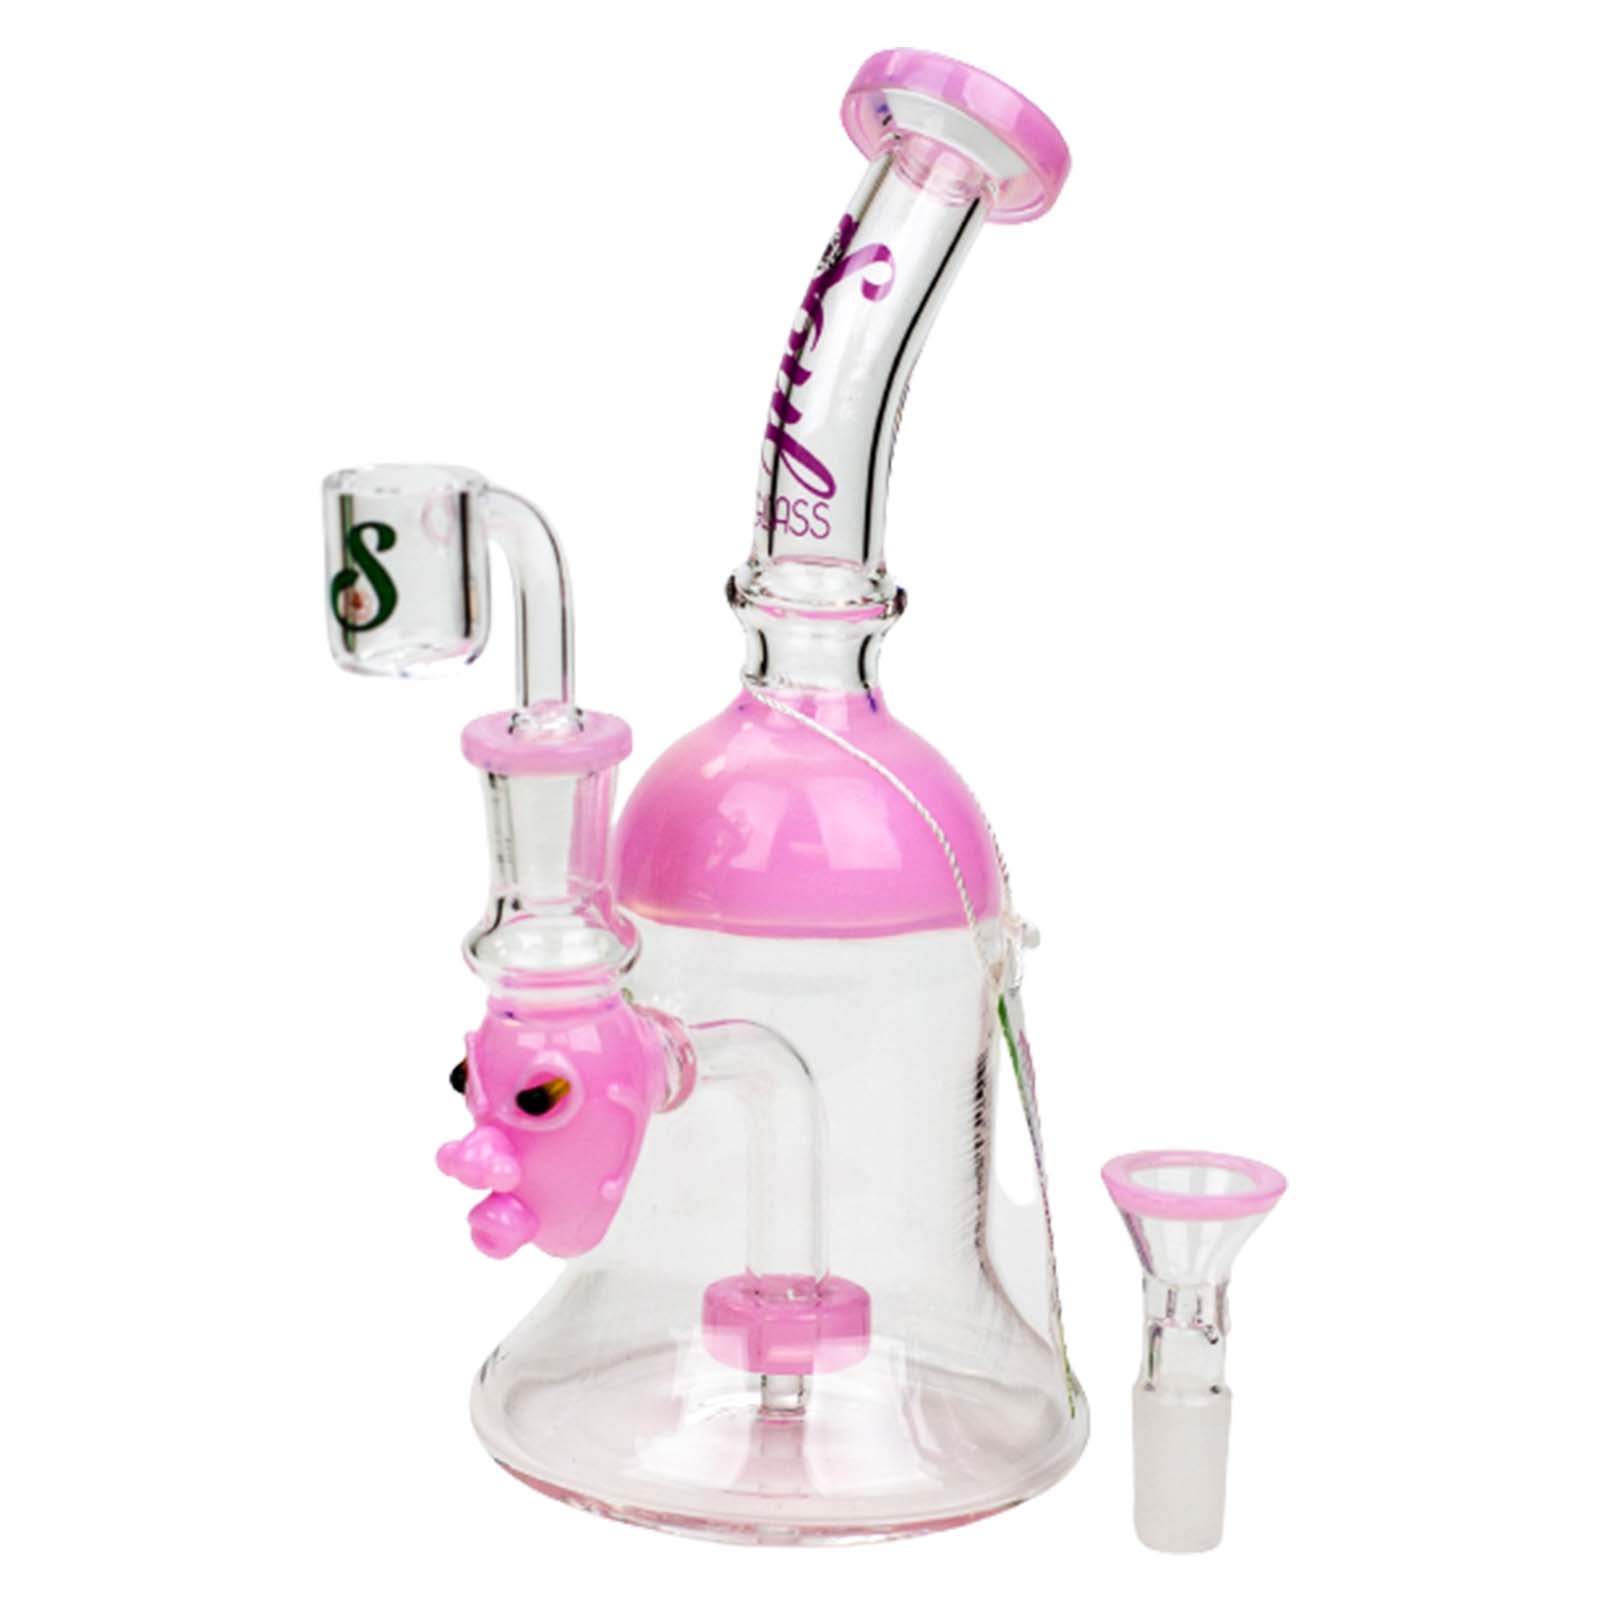 8.5" SOUL 2-in-1 Showerhead Diffuser Recycler Rig Pilotdiary